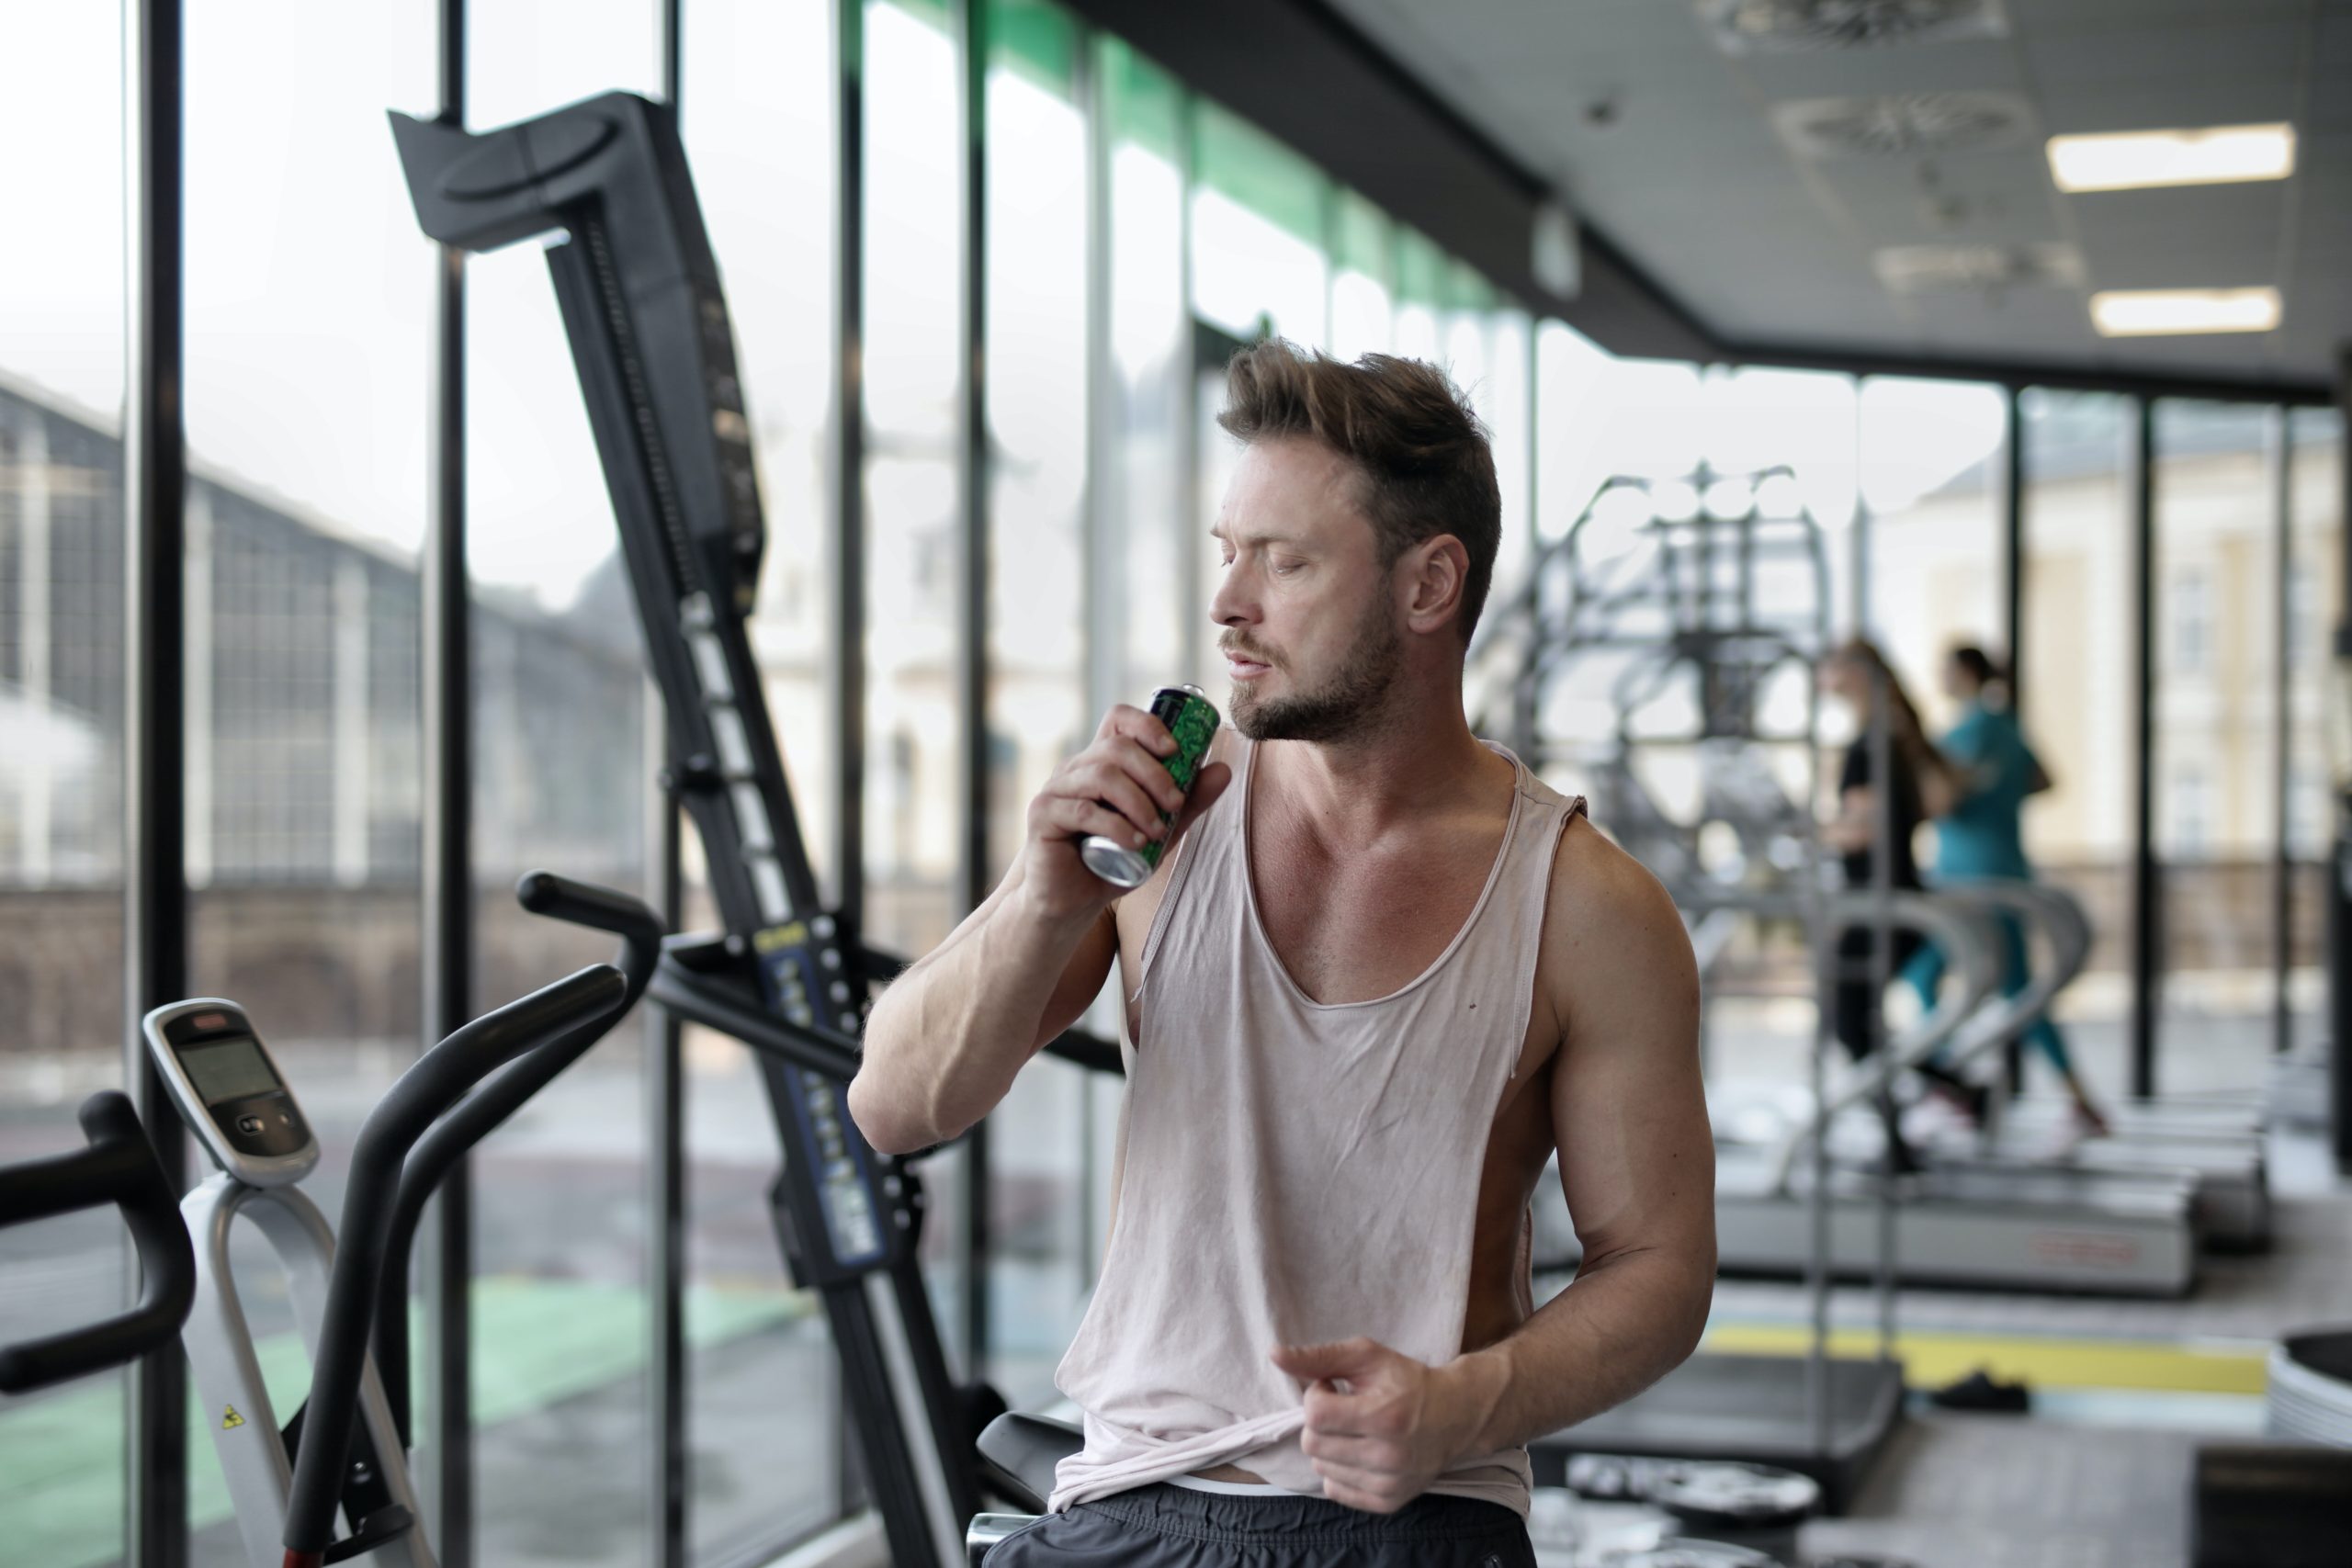 A man drinking a beverage after working out